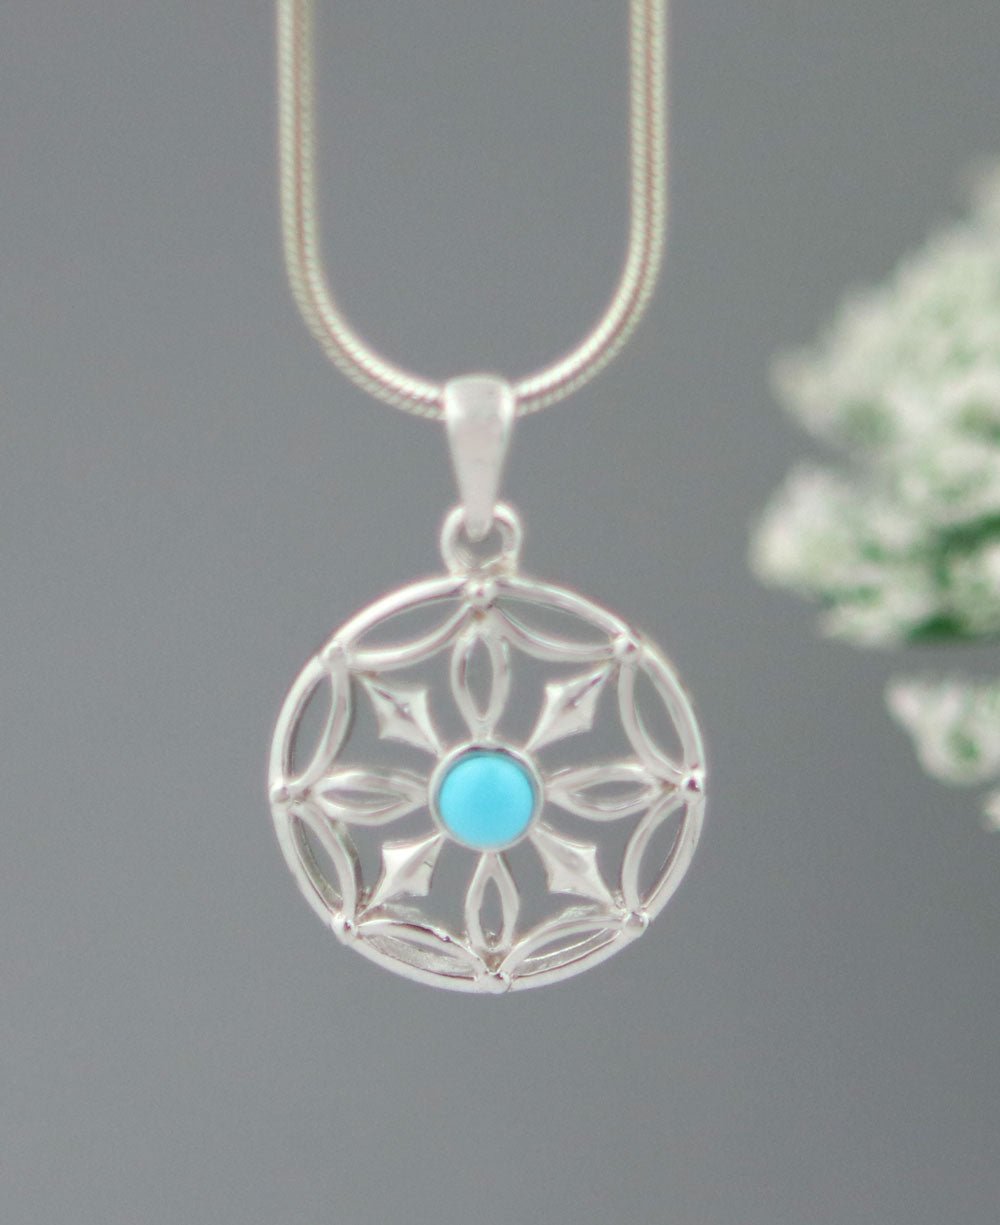 Dharma Wheel Pendant in Sterling Silver and Turquoise - Charms & Pendants